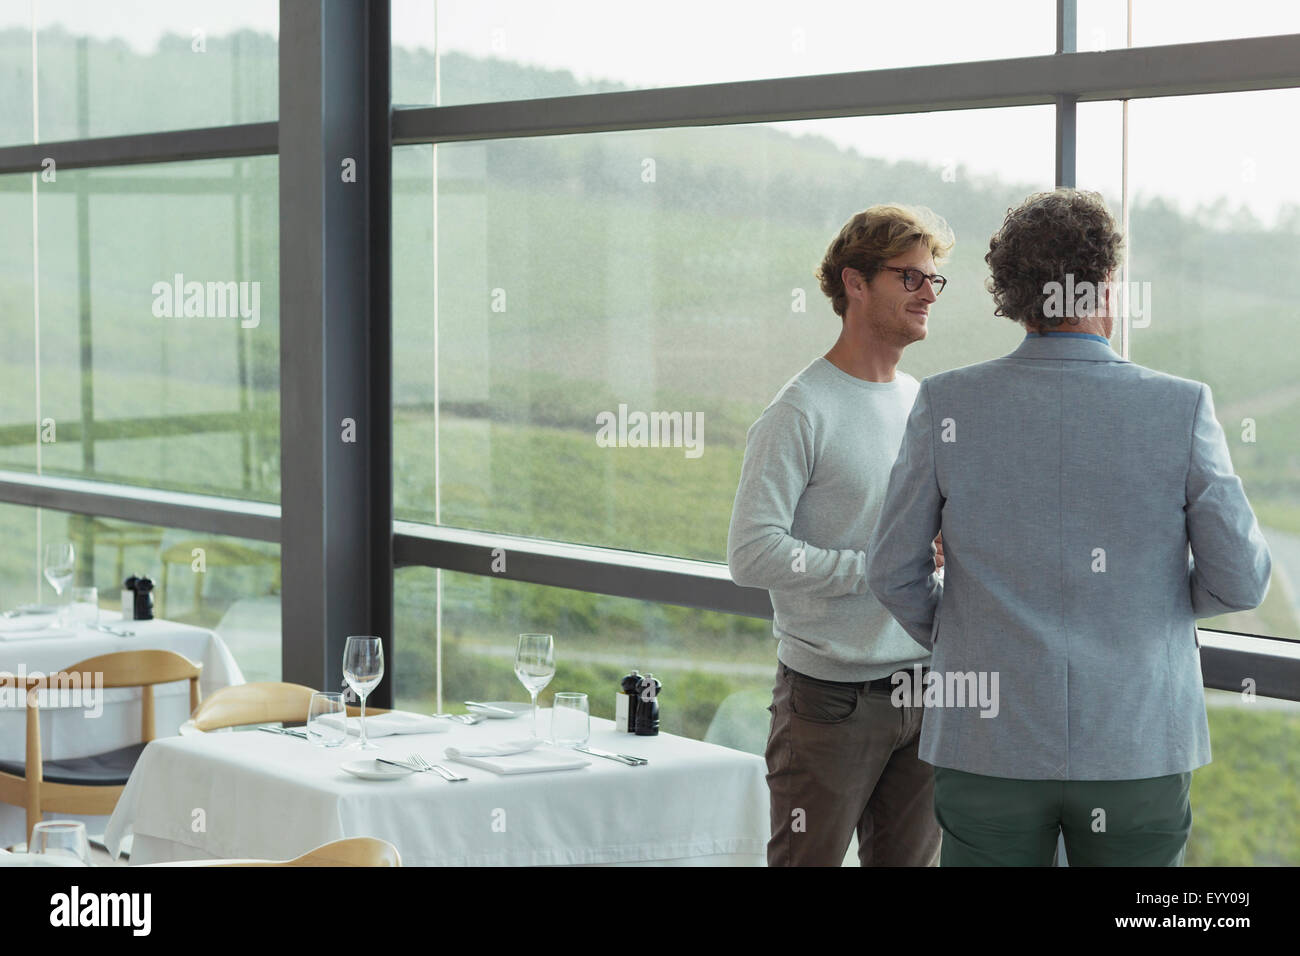 Men talking at winery dining room window Stock Photo